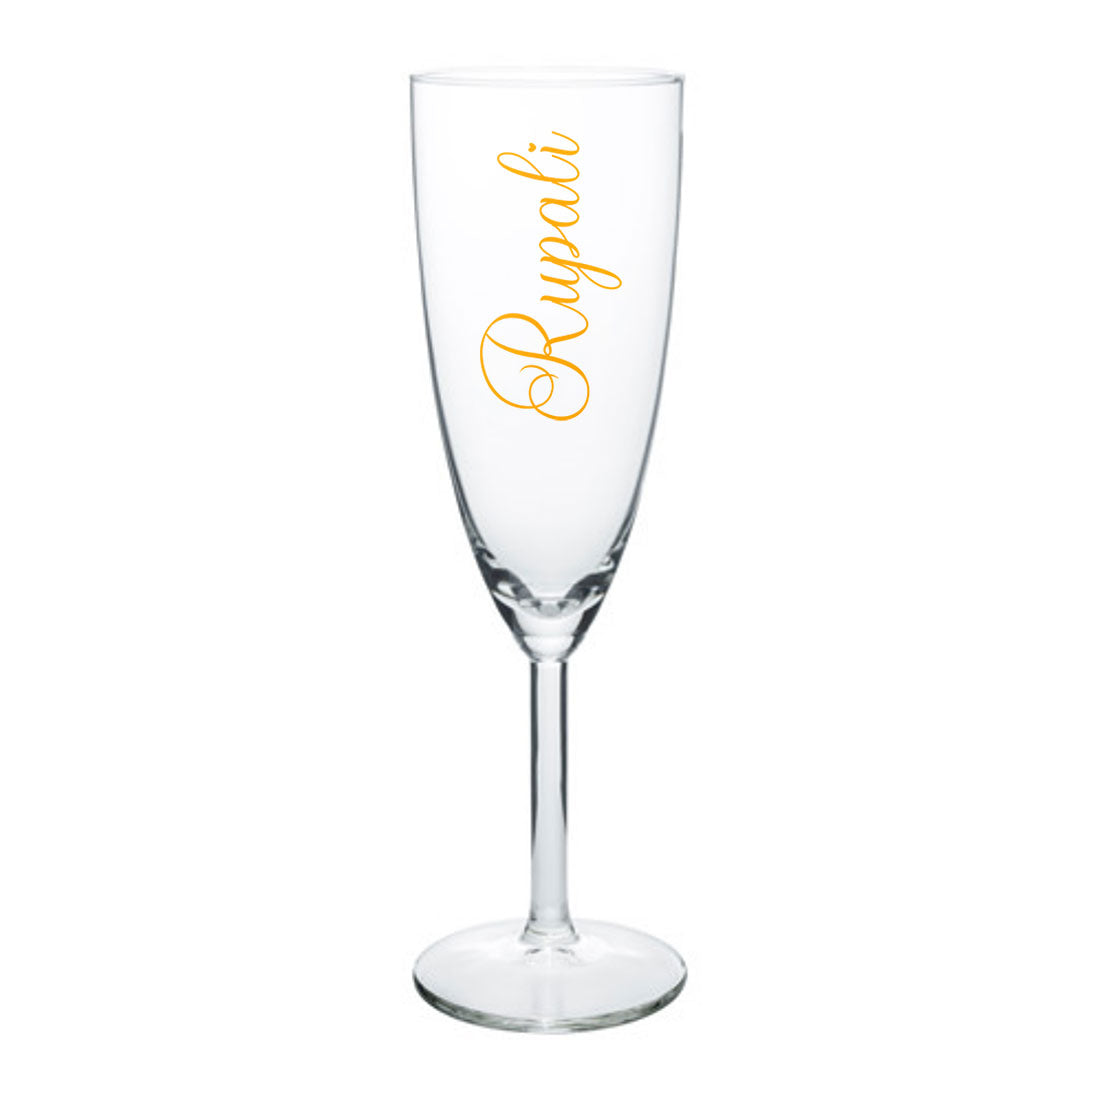 Personalized Champagne Flute Glasses Birthday Gifts for Wife - Add Name